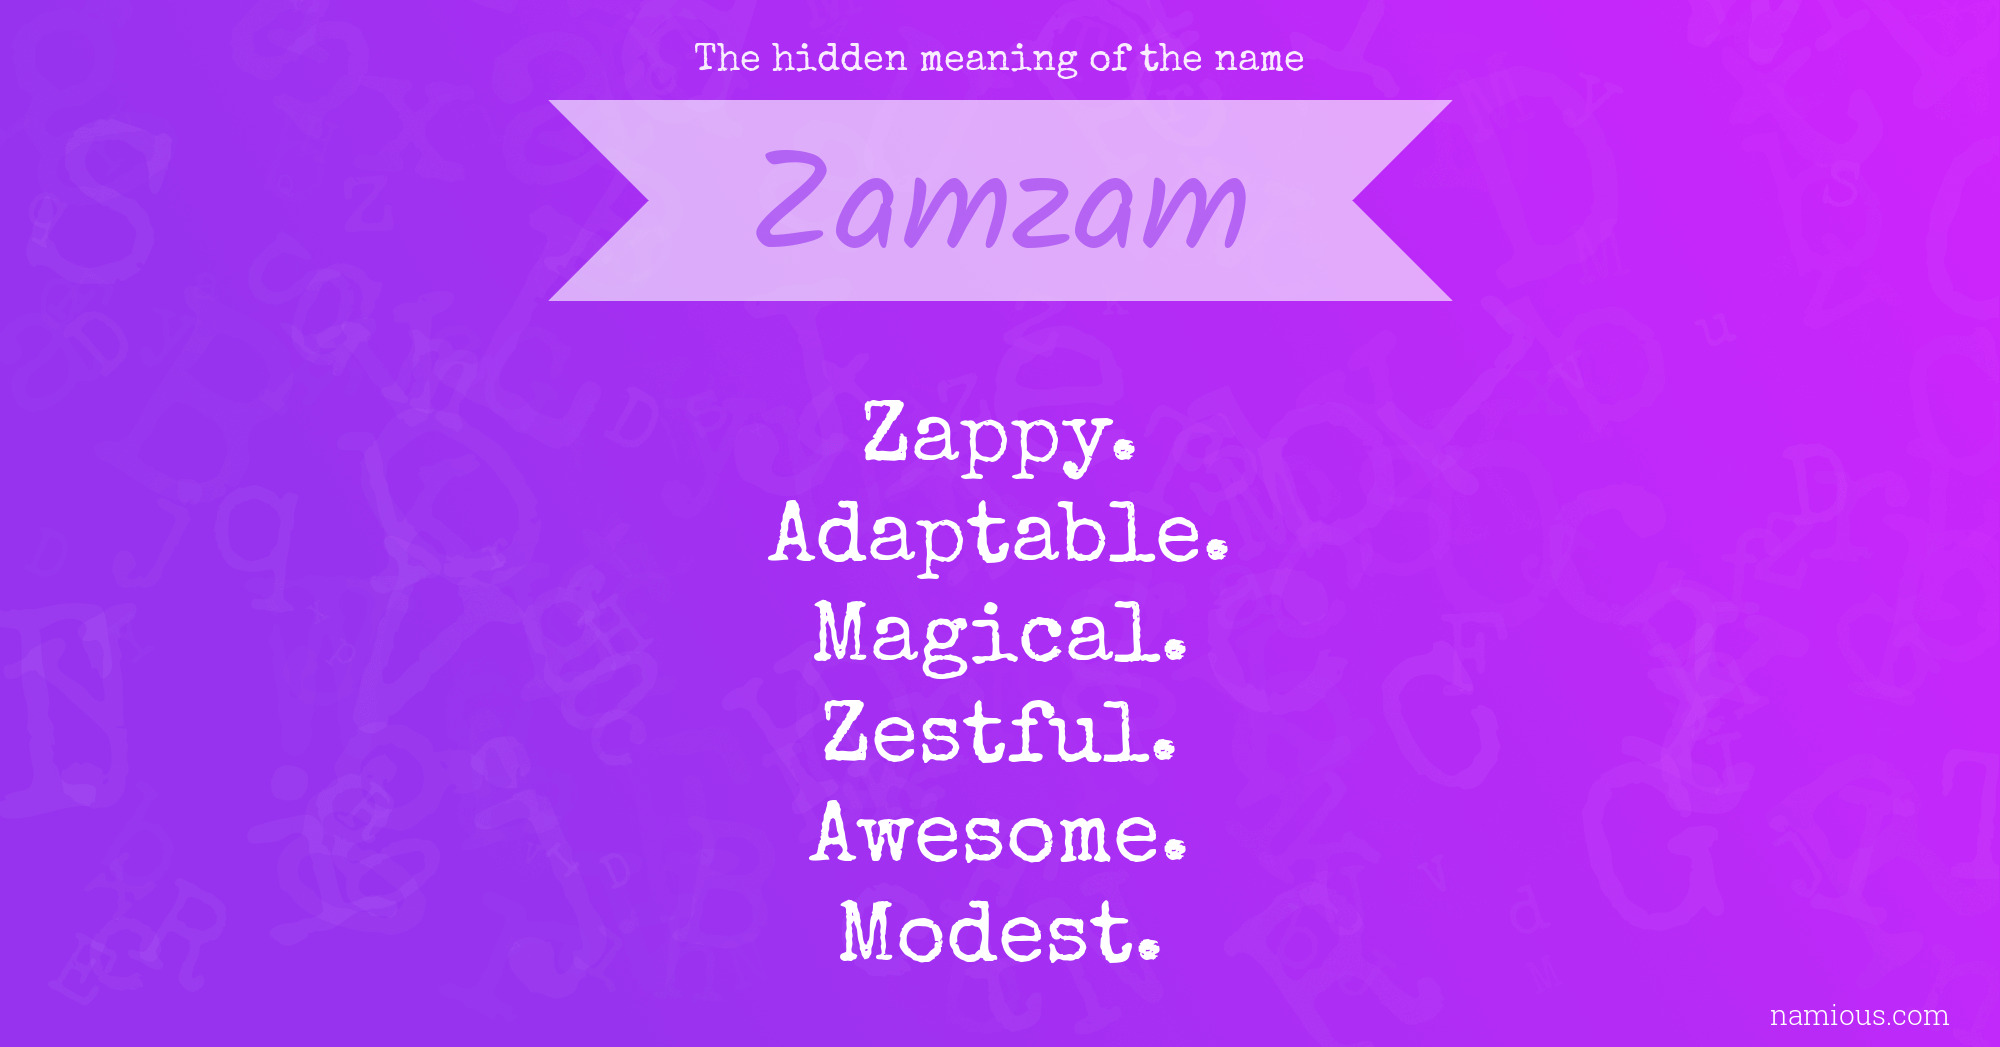 The hidden meaning of the name Zamzam